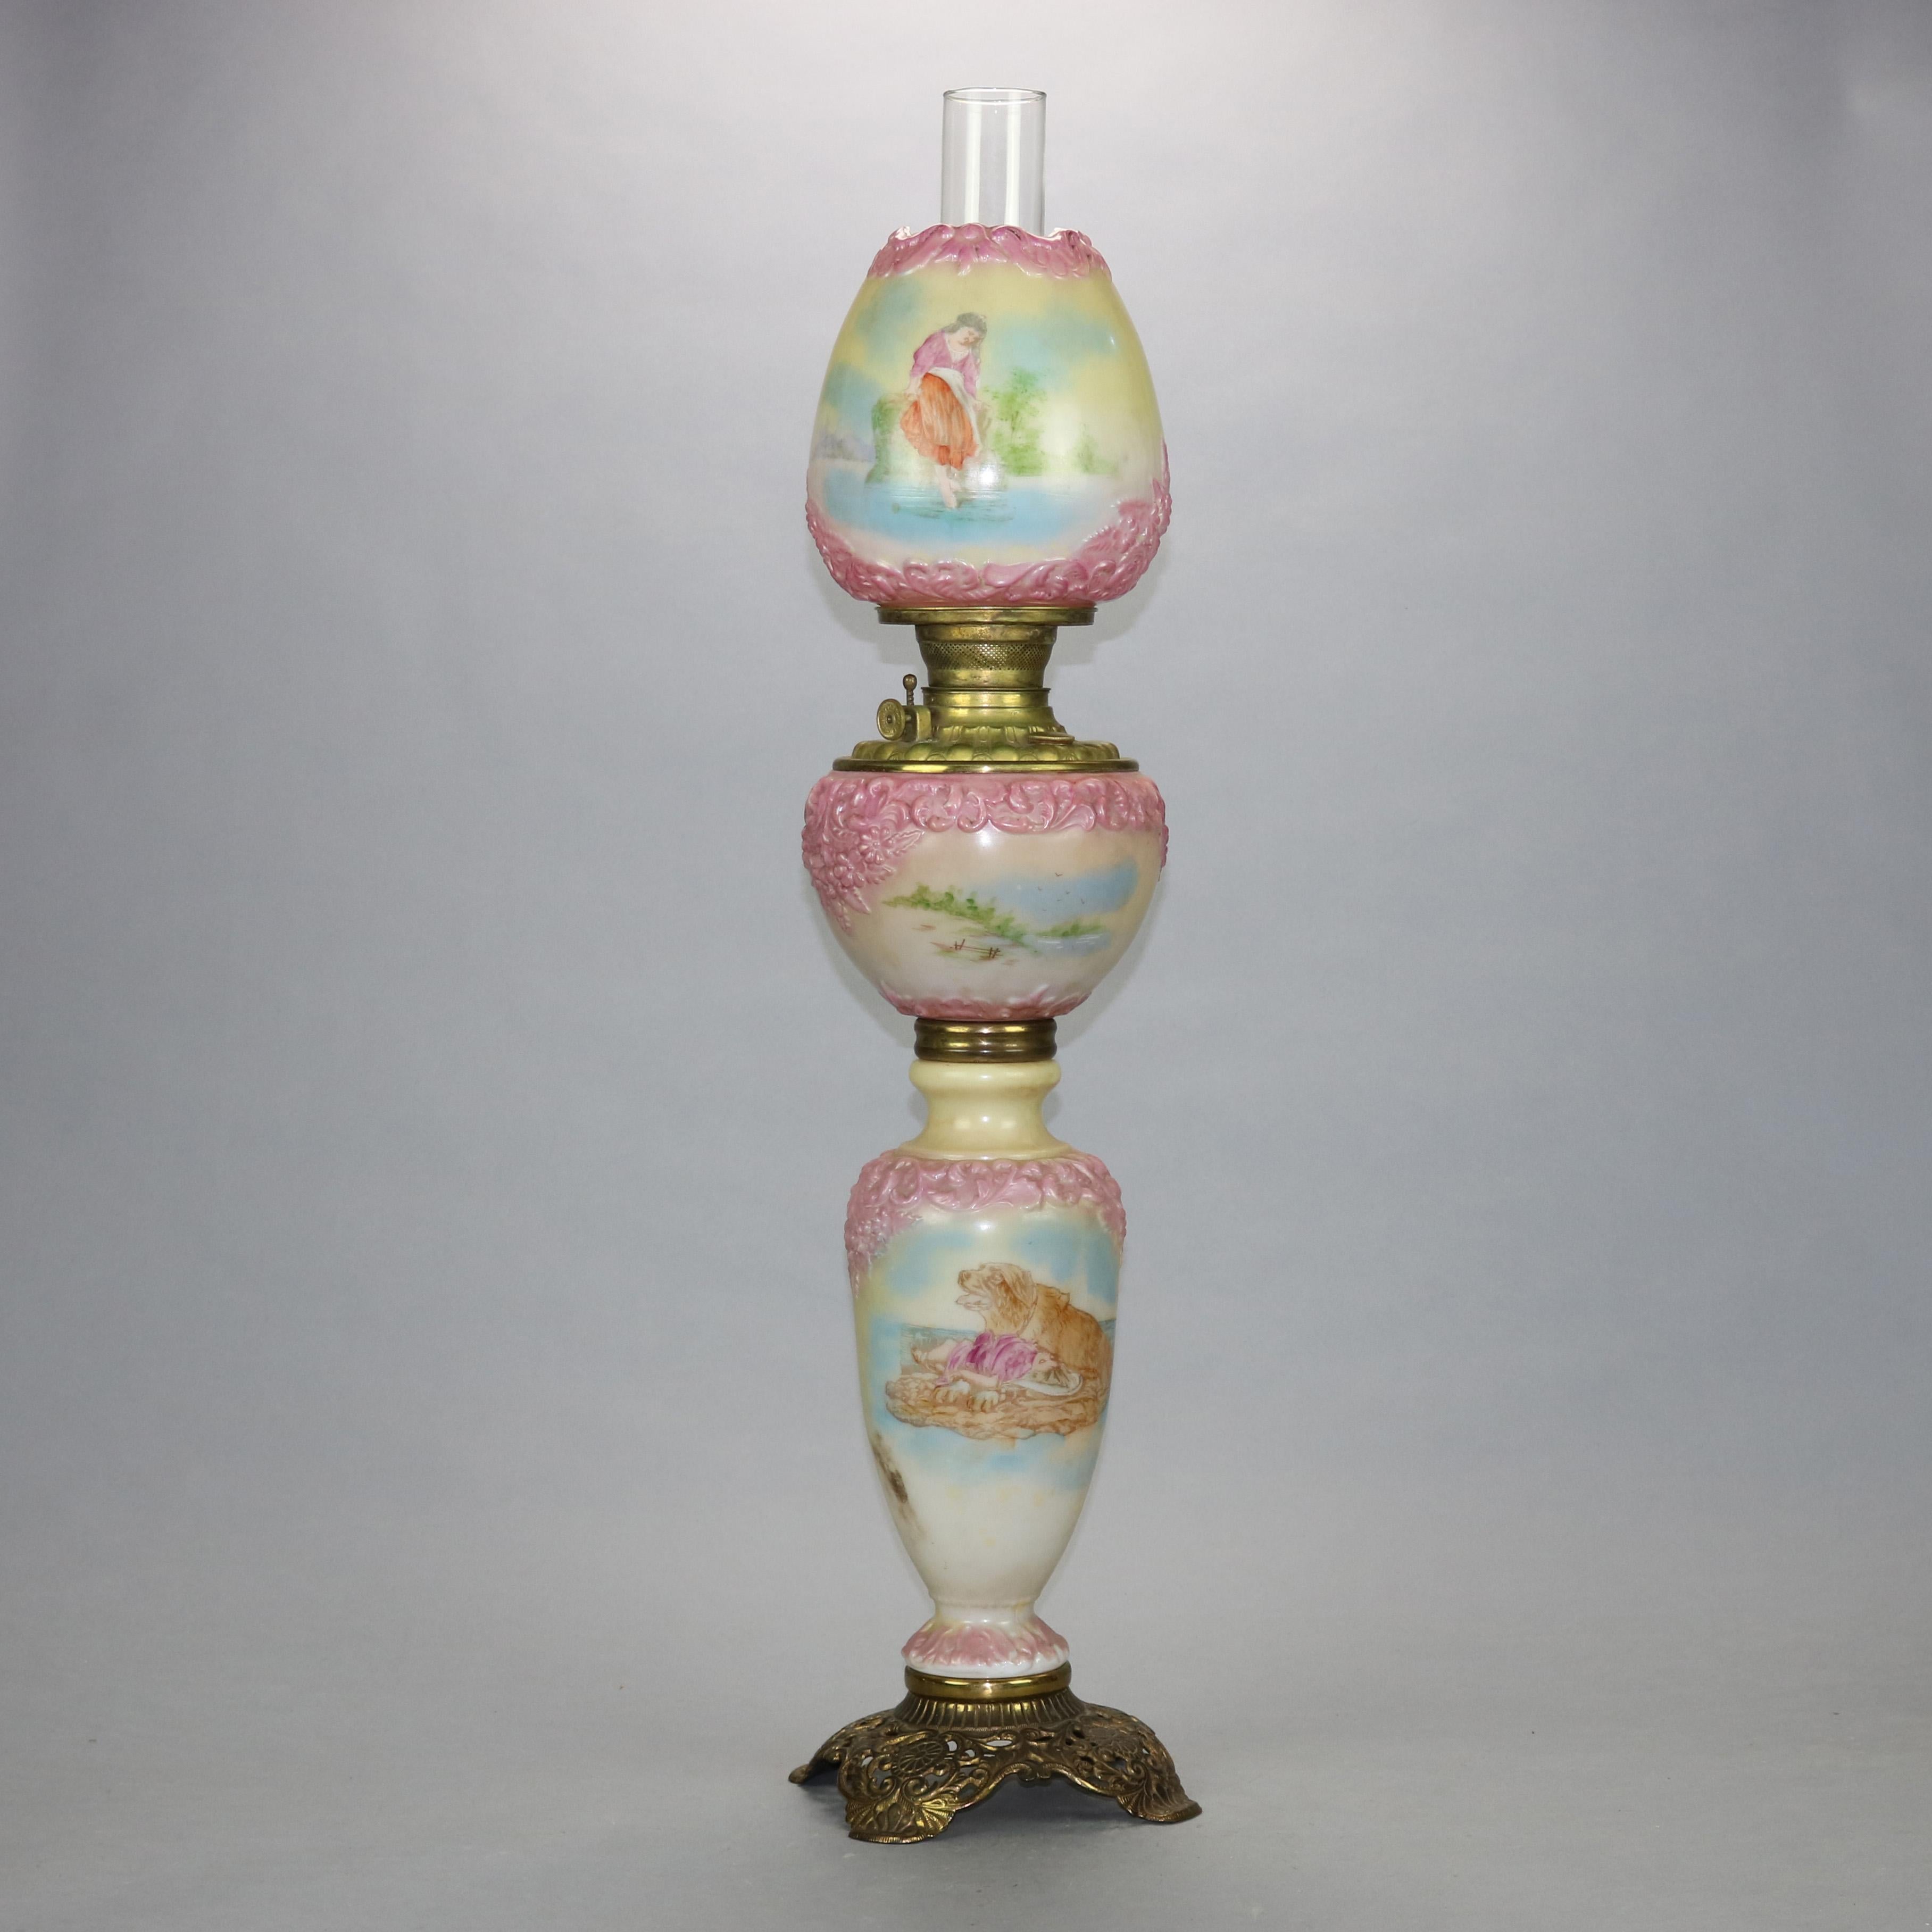 An antique Mount Washington gone with the wind parlor oil lamp offers blown out glass shade and base with hand painted scenes with girl and dog, raised on foliate cast bronze base, c1890.

Measures: 33.5